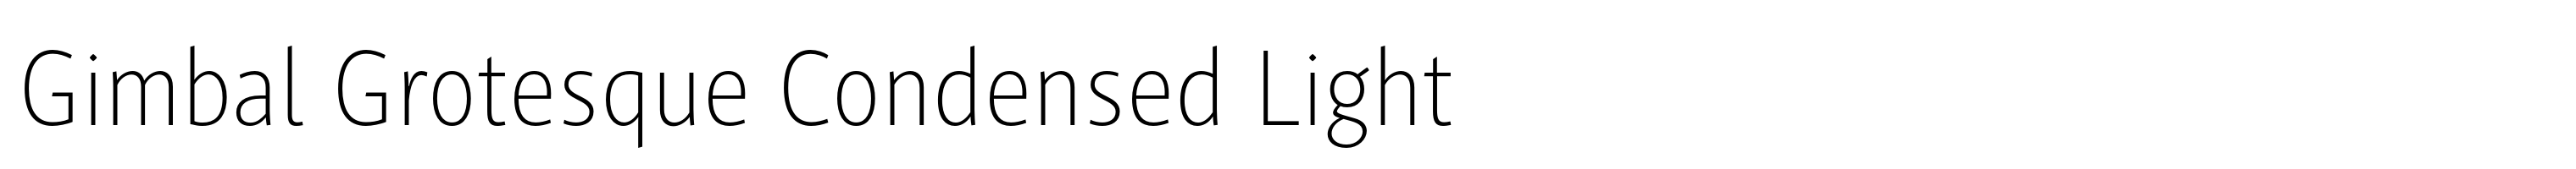 Gimbal Grotesque Condensed Light